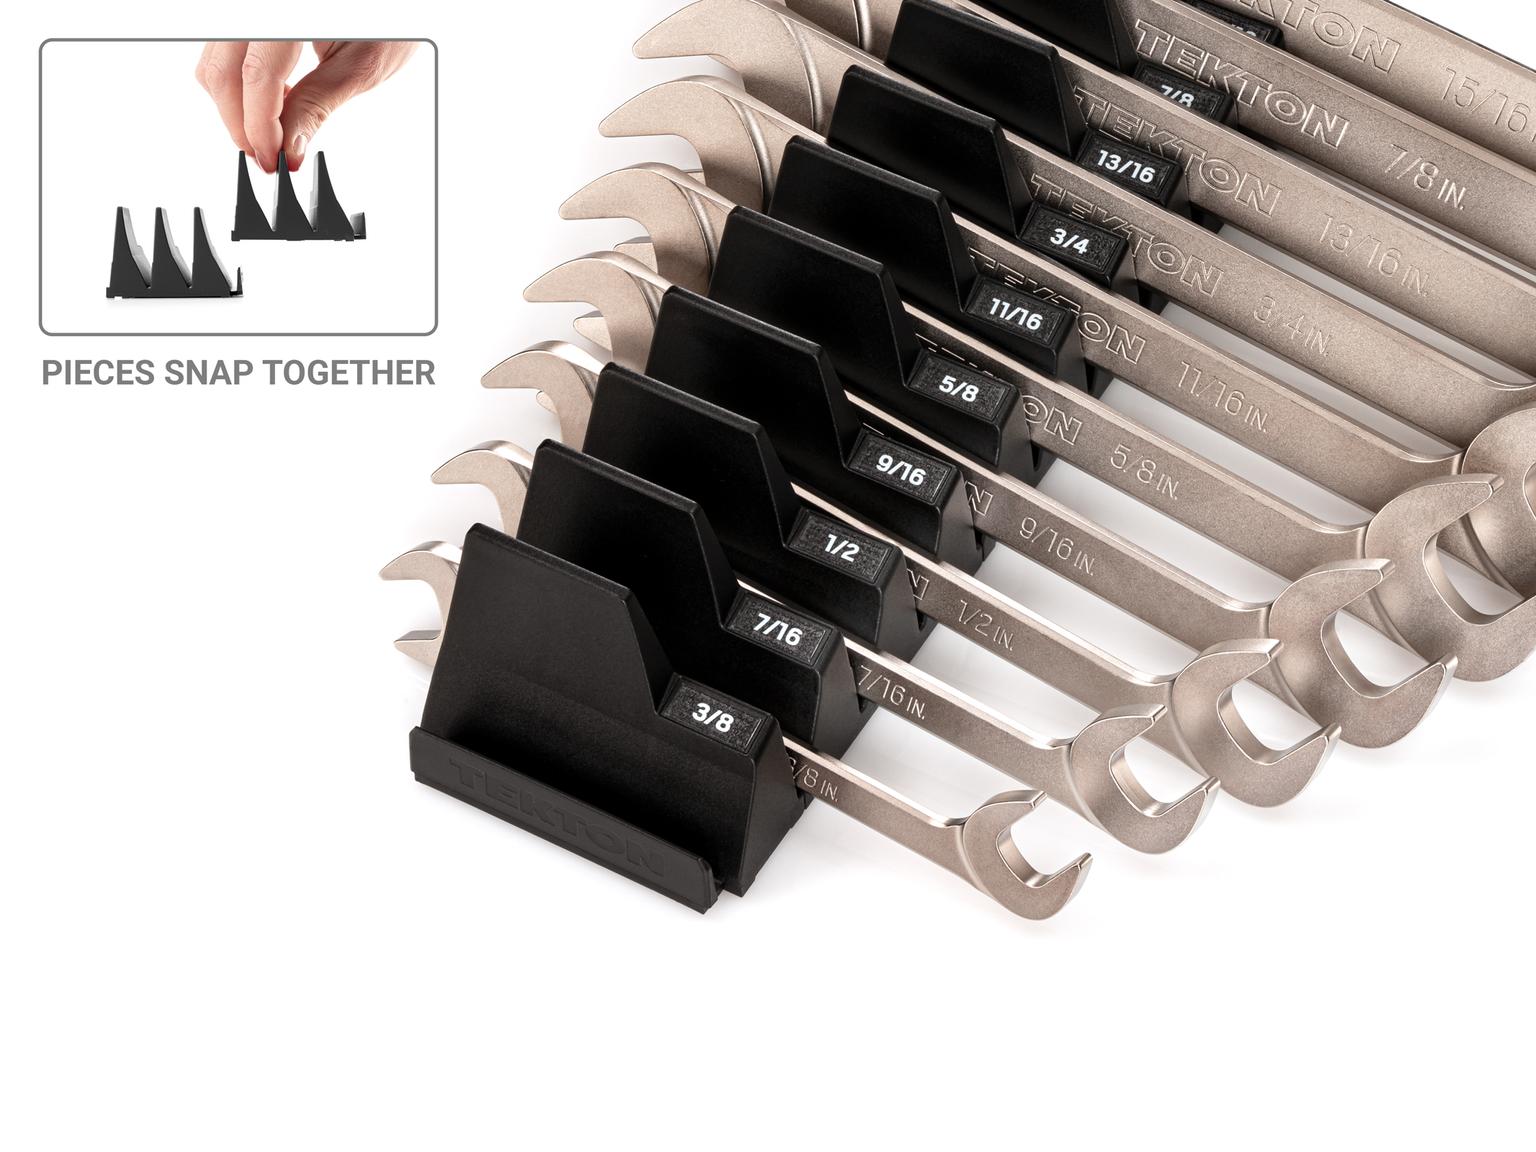 TEKTON WAE91502-T Angle Head Open End Wrench Set with Modular Slotted Organizer, 11-Piece (3/8-1 in.)